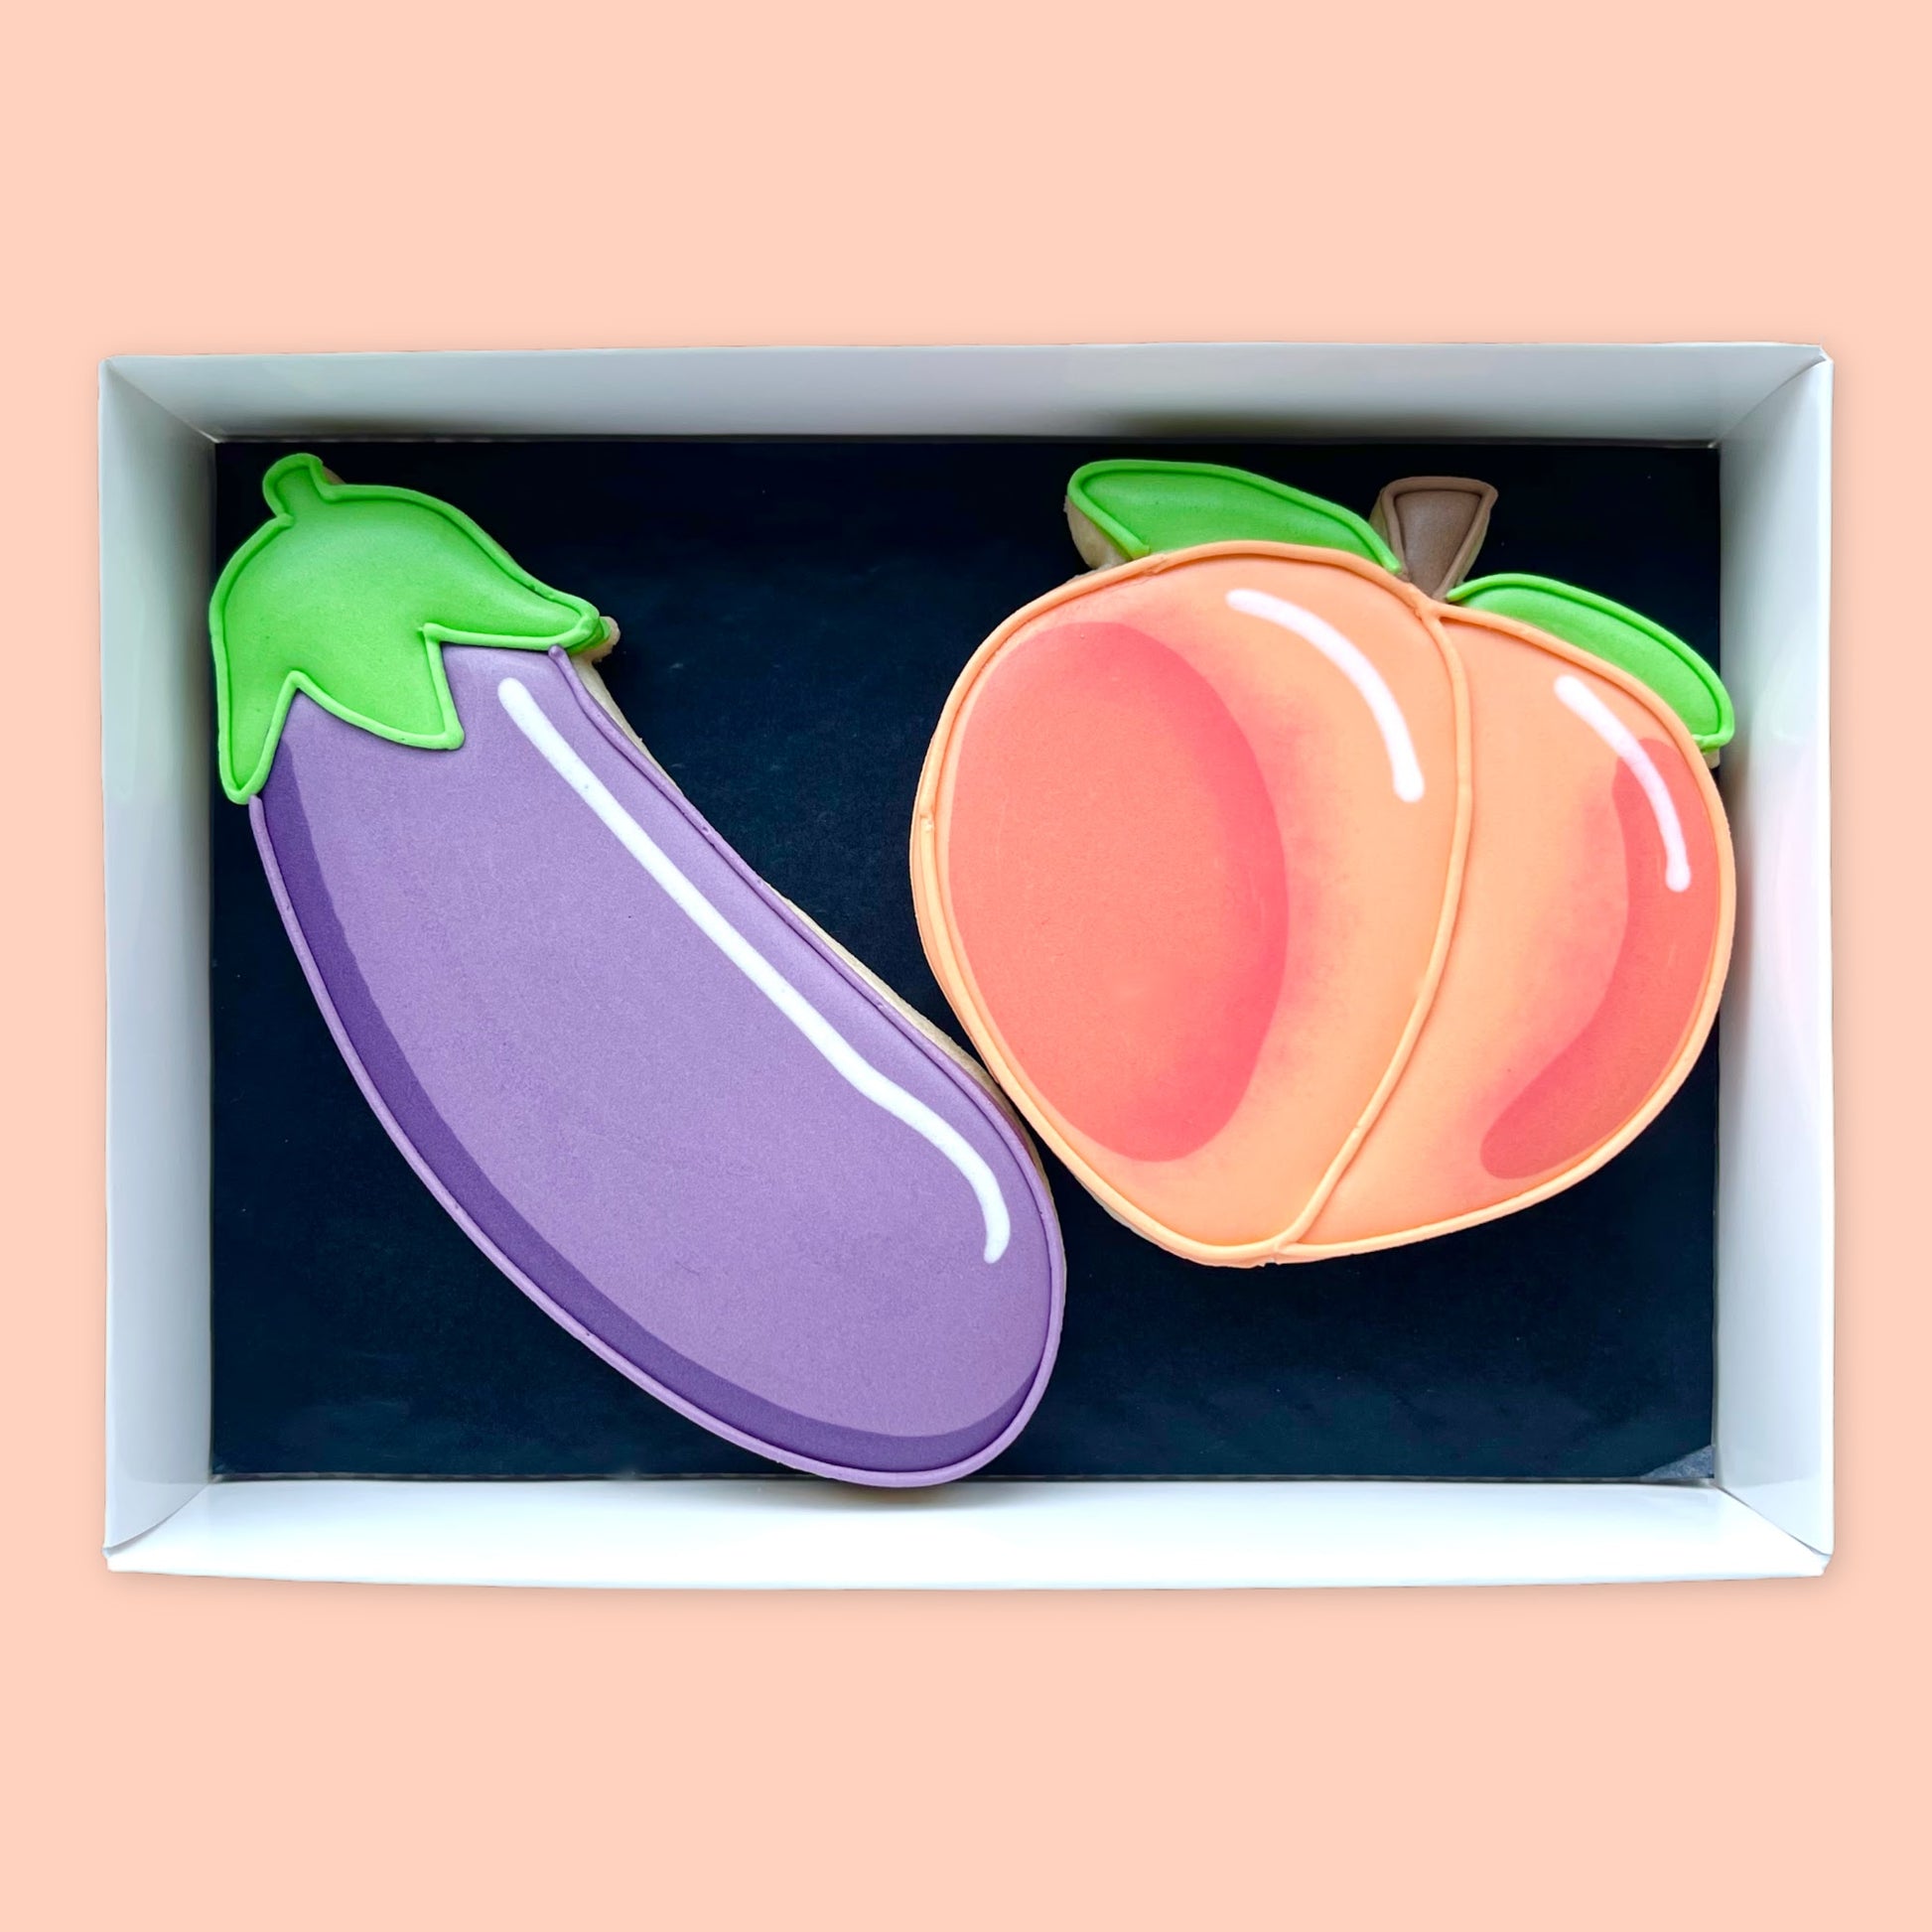 Hand iced peach and aubergine emoji biscuits in a open white gift box by Katie's biacuit shop